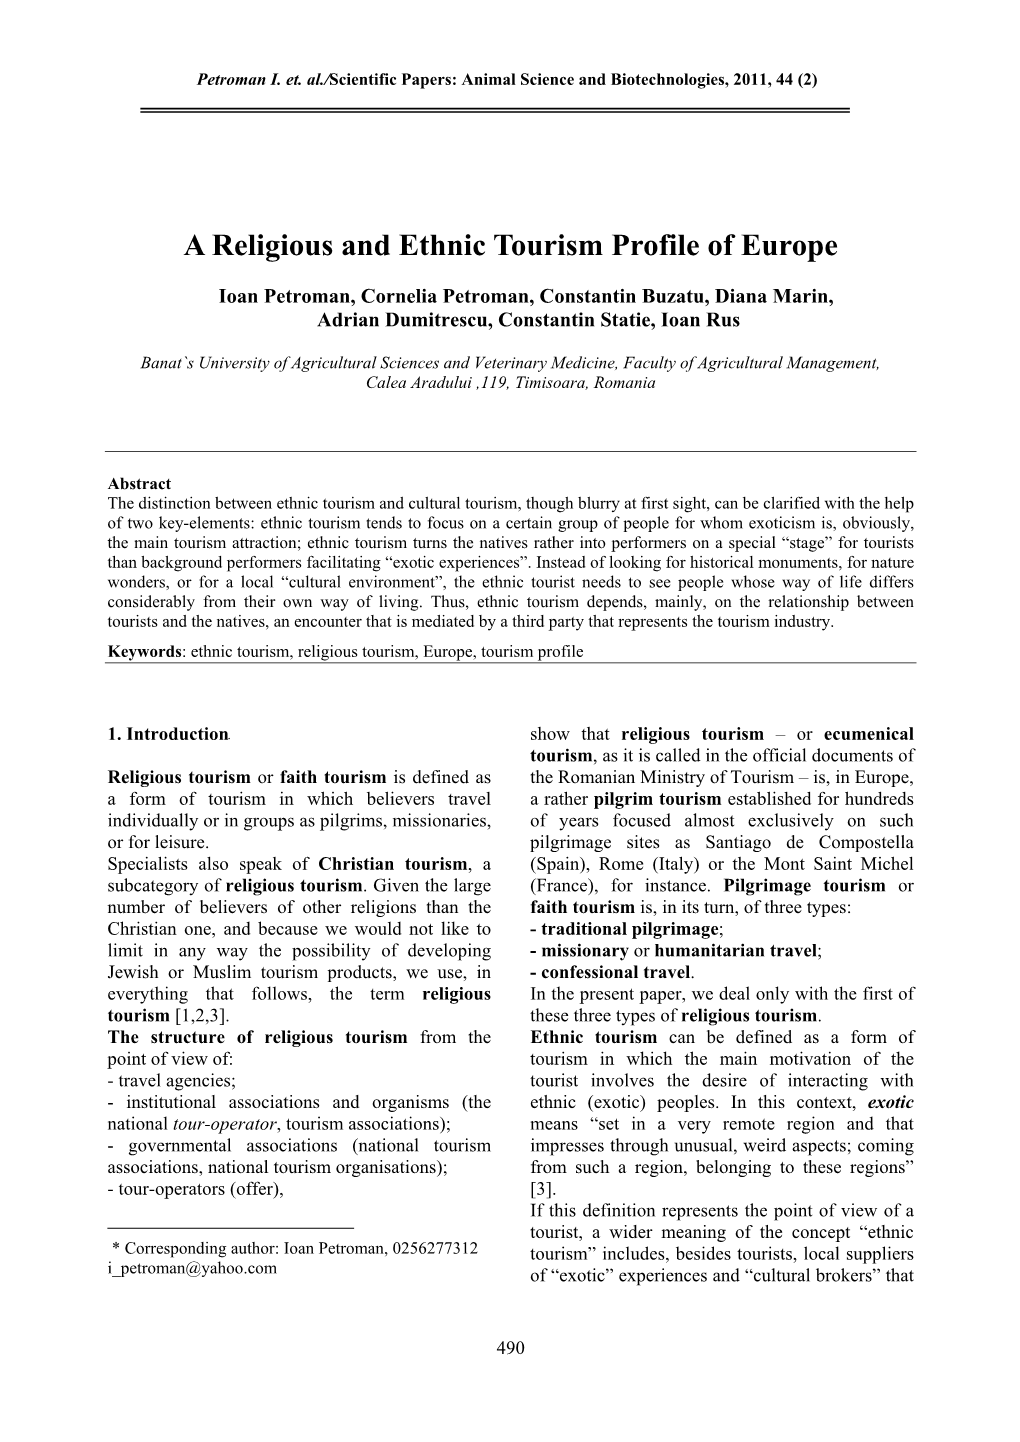 A Religious and Ethnic Tourism Profile of Europe